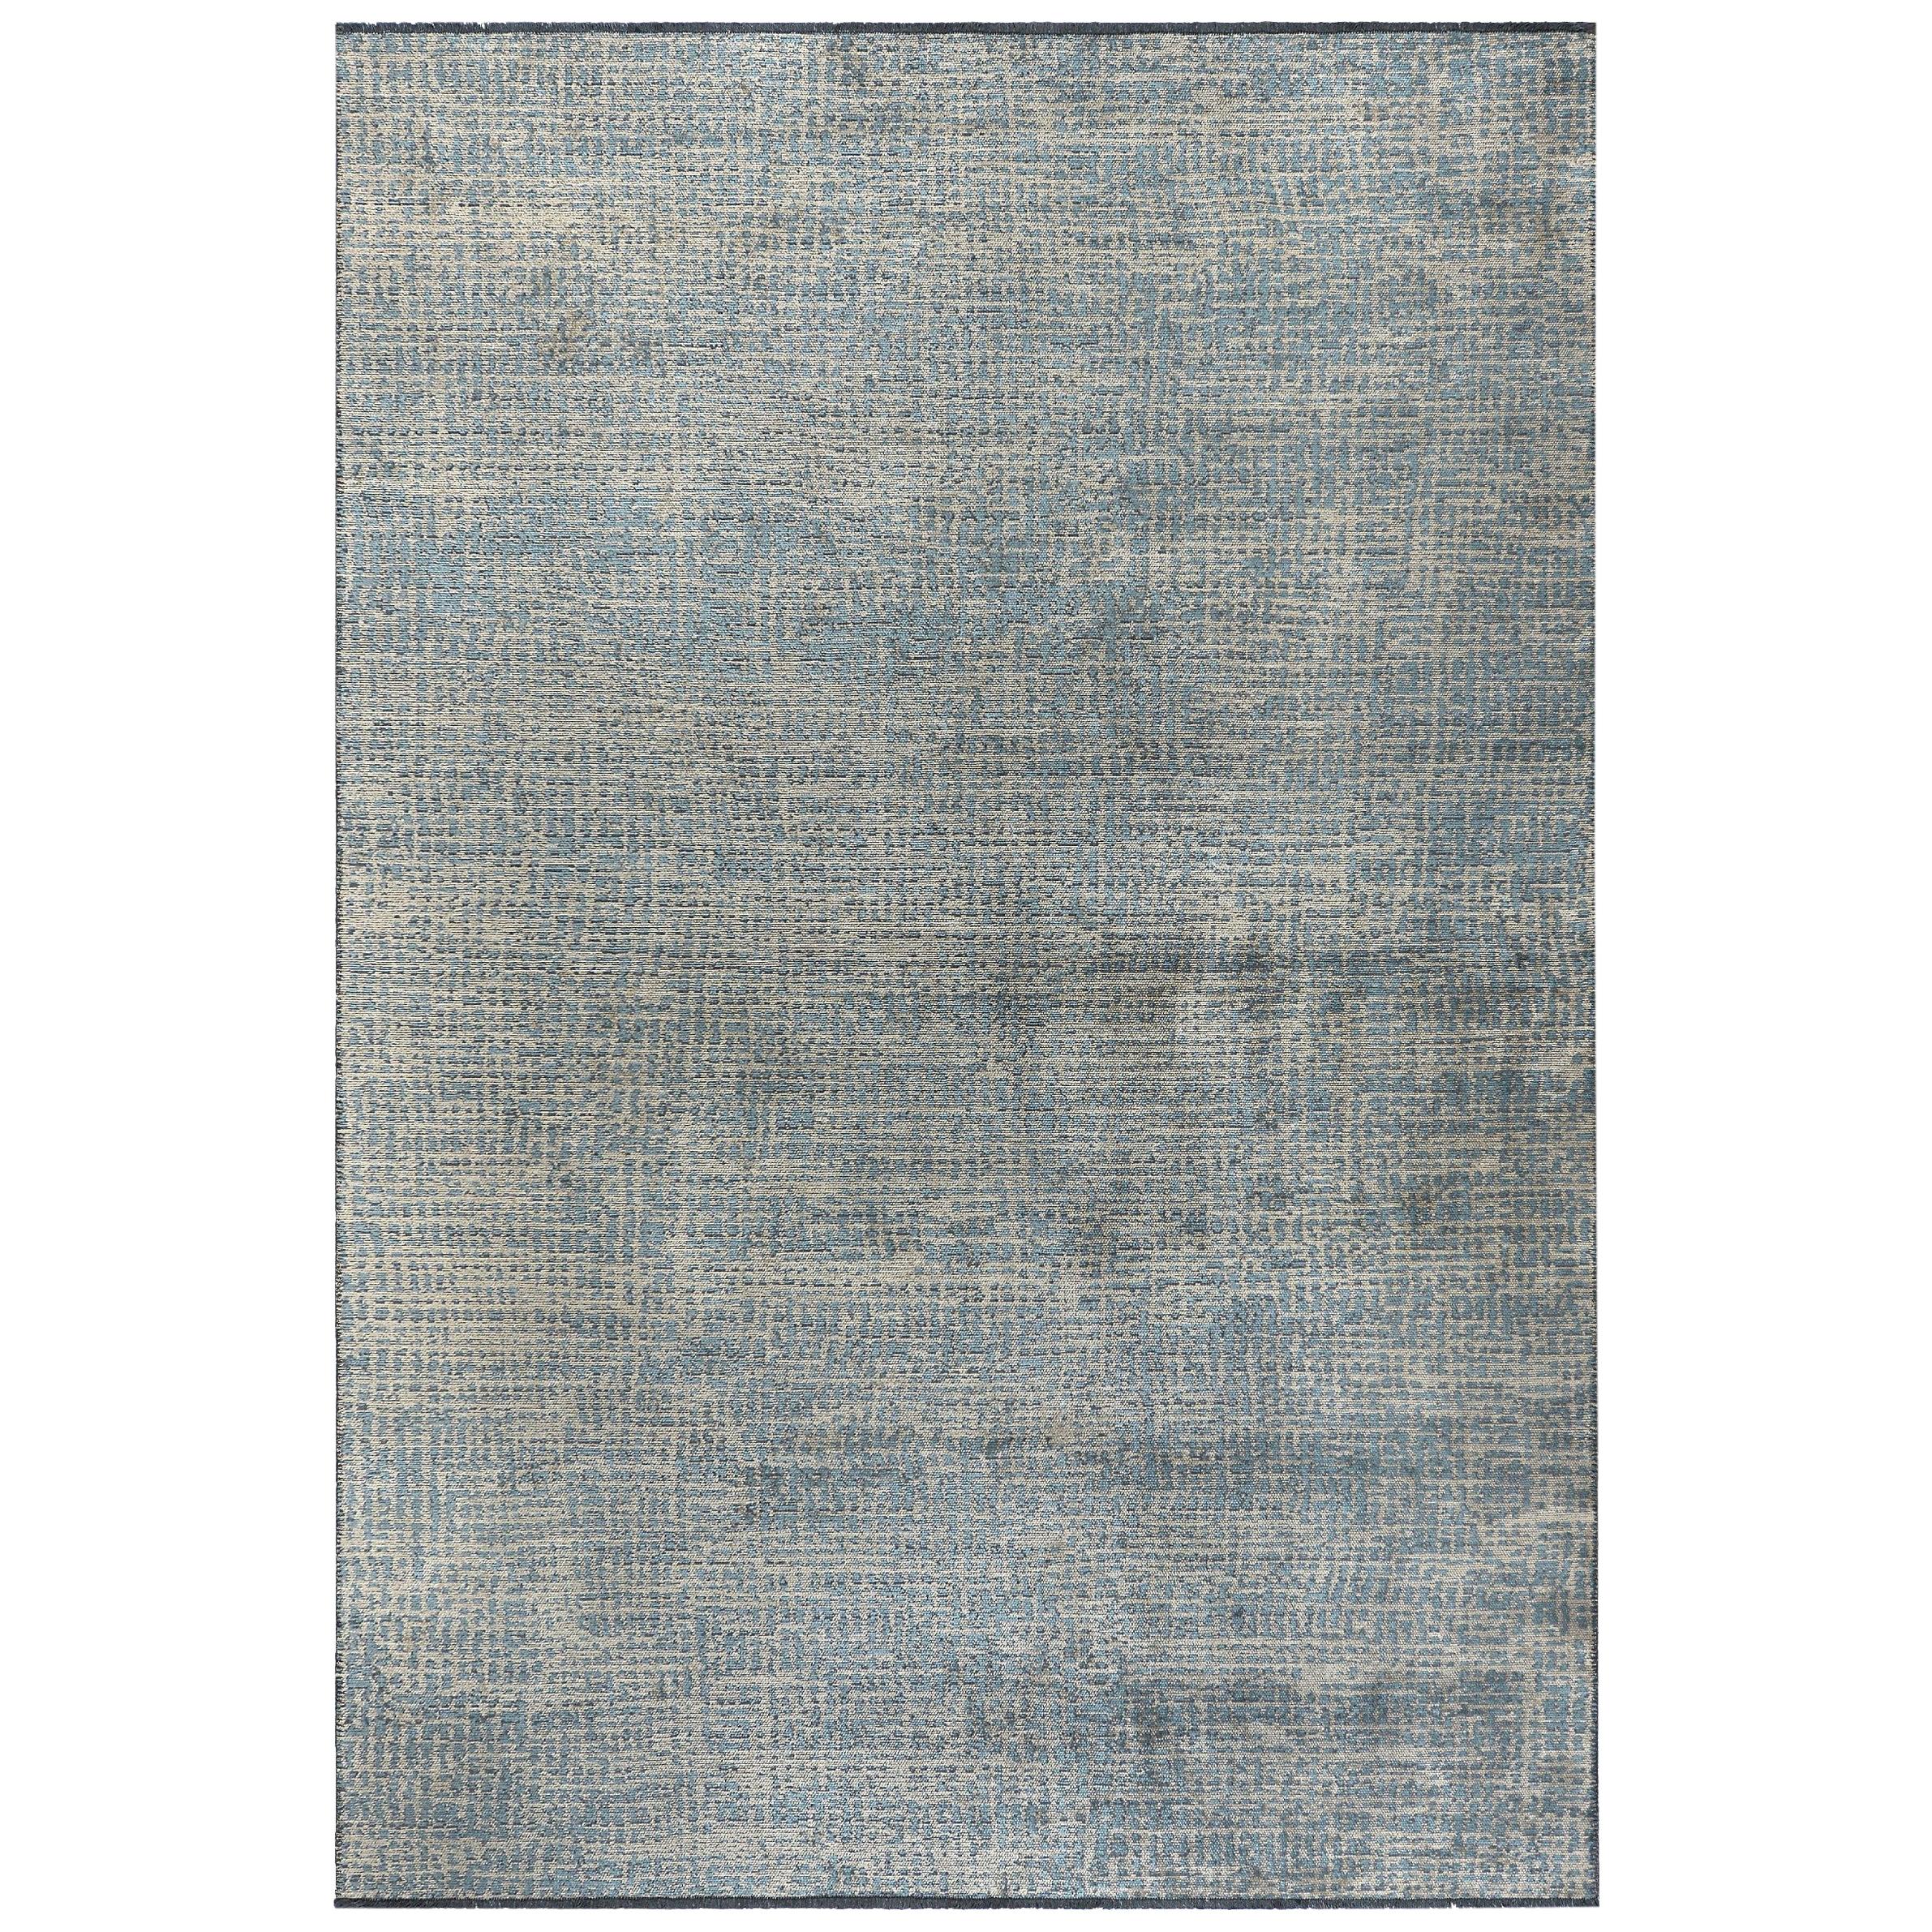 Light Blue and Silver Gray Tight Grid Abstract-Geo Pattern Rug with Shine For Sale